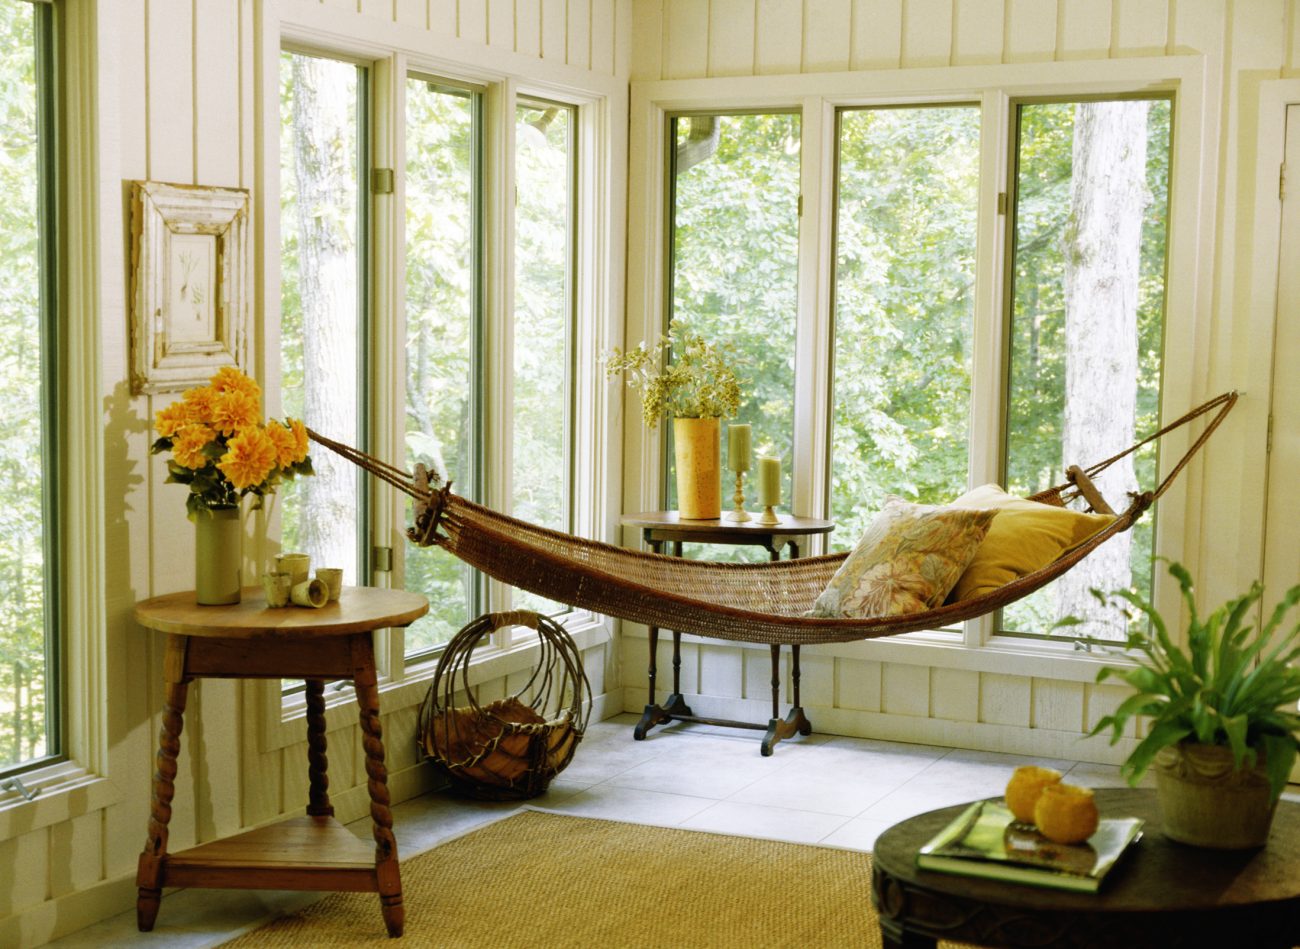 Sunroom surrounded by trees, wood-panelled walls, hammock, vintage wooden tables and flower vases